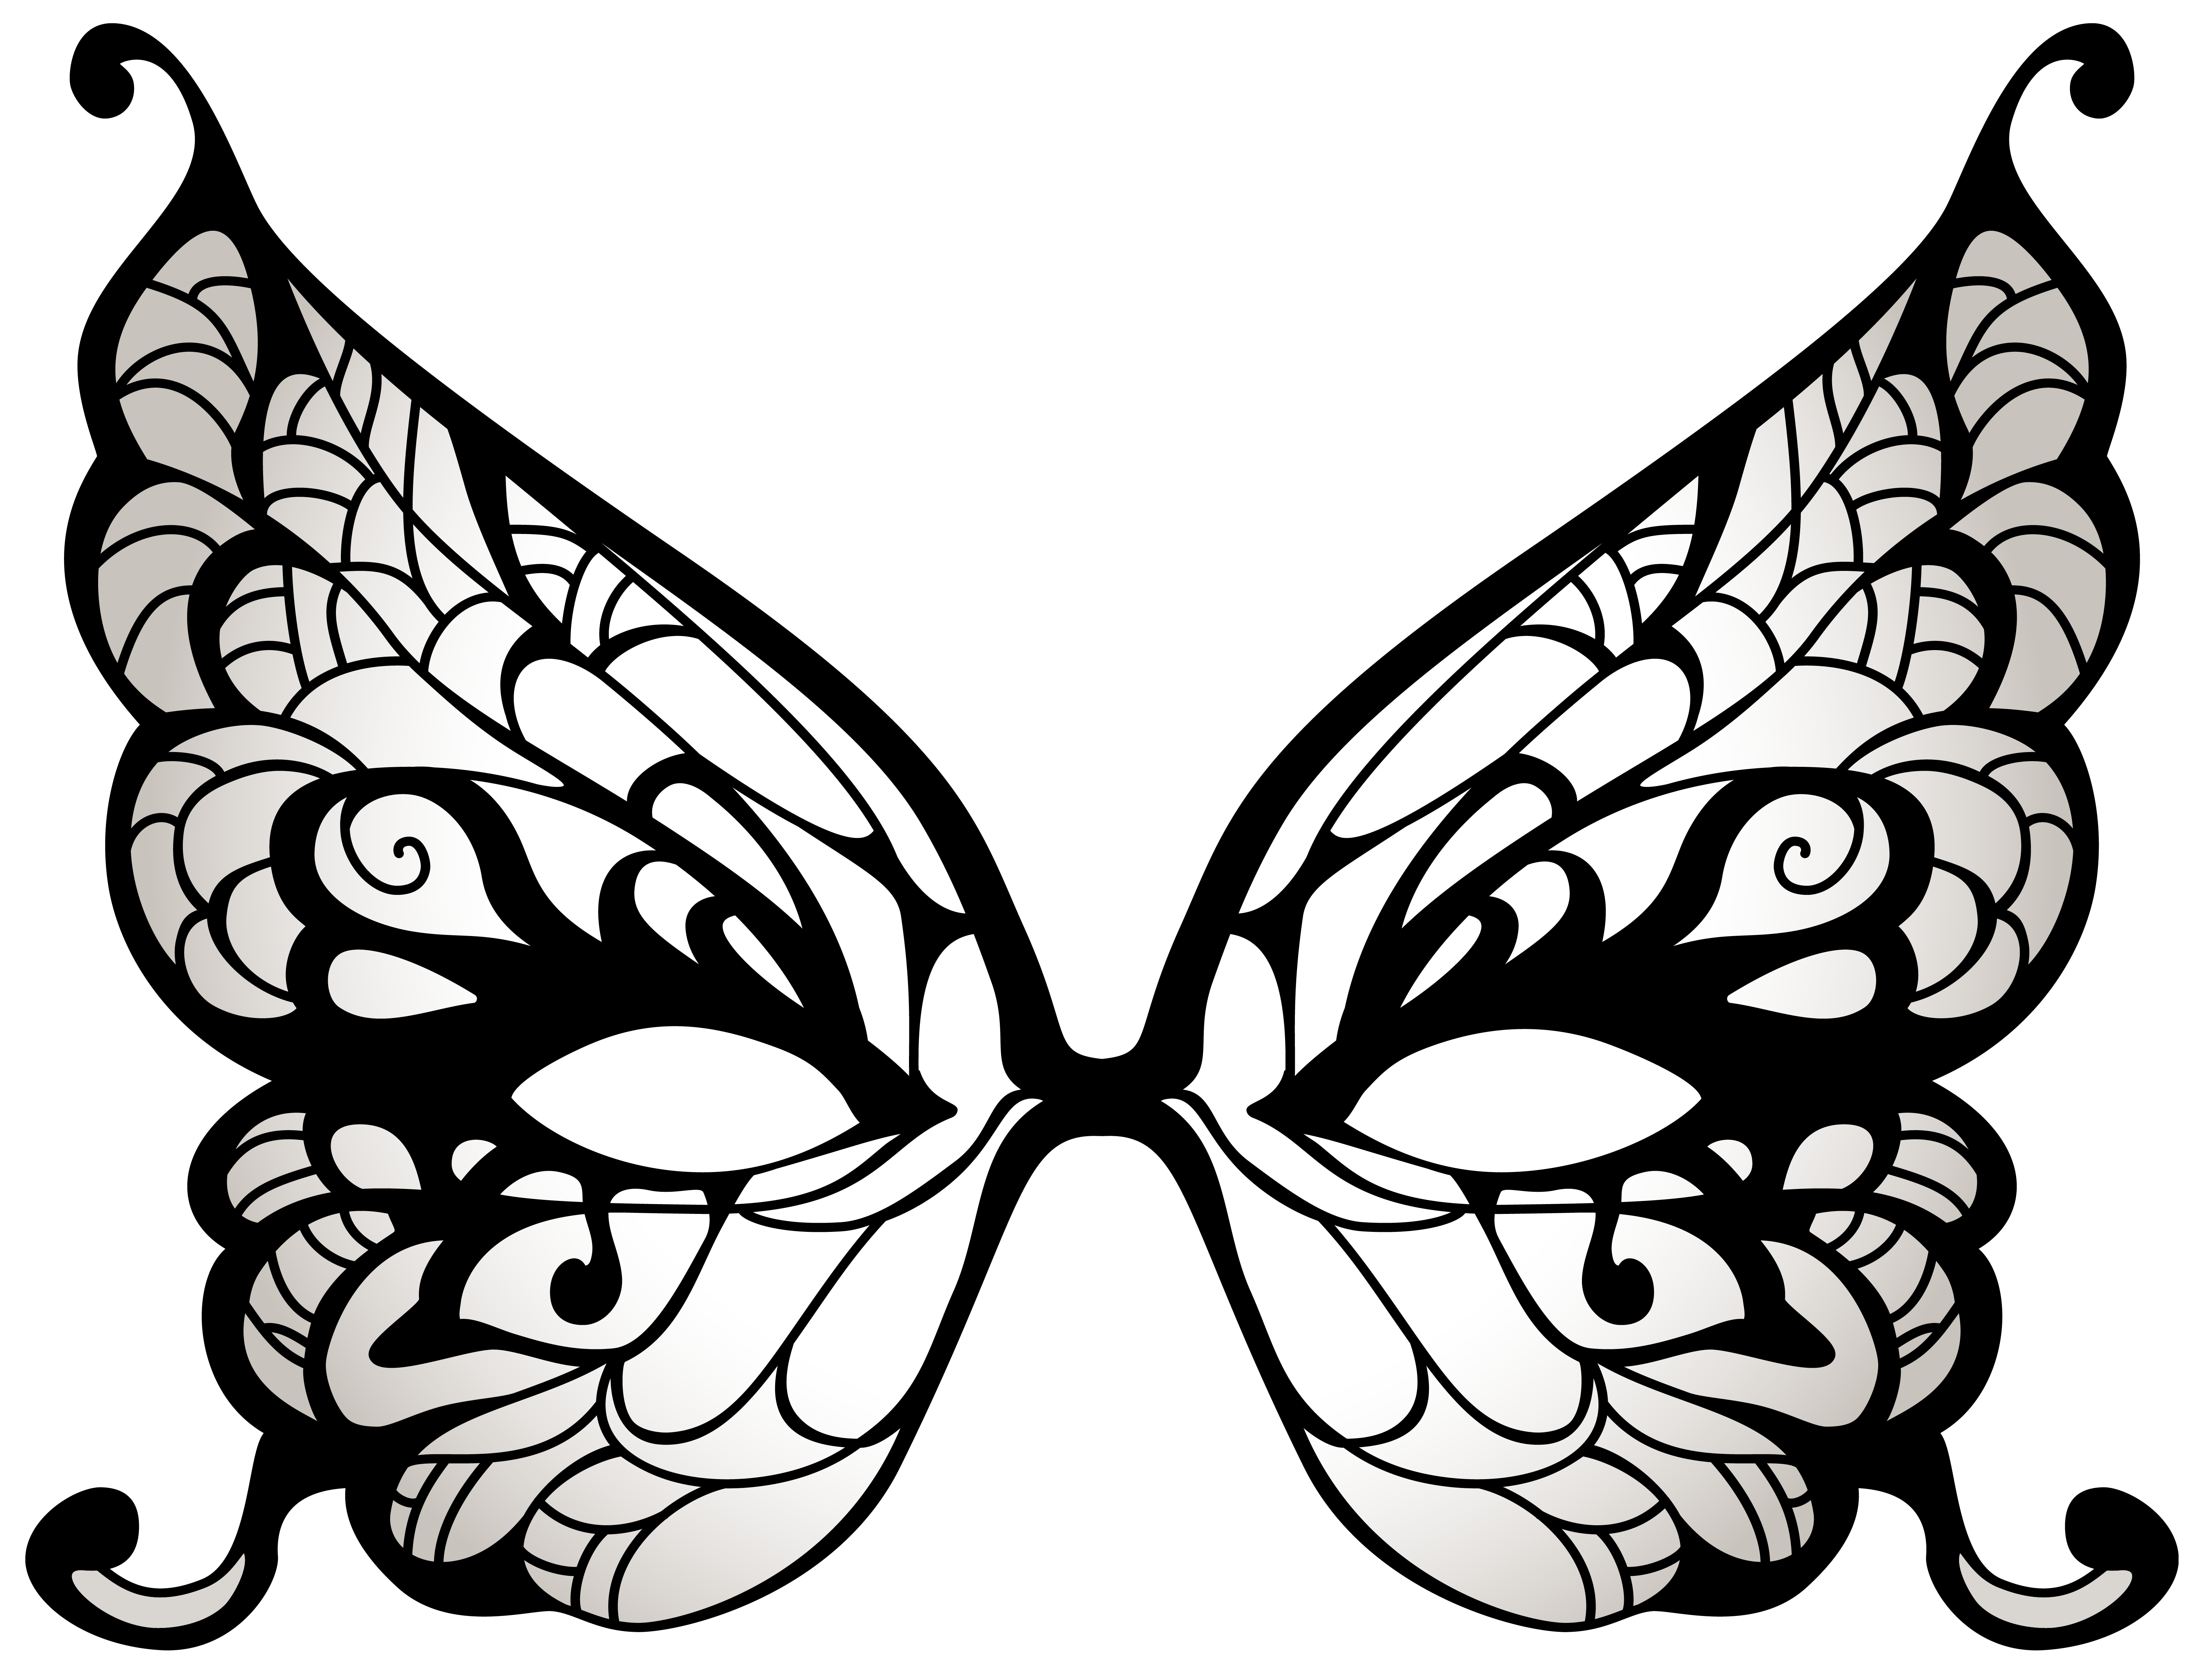 Butterfly Mask Template